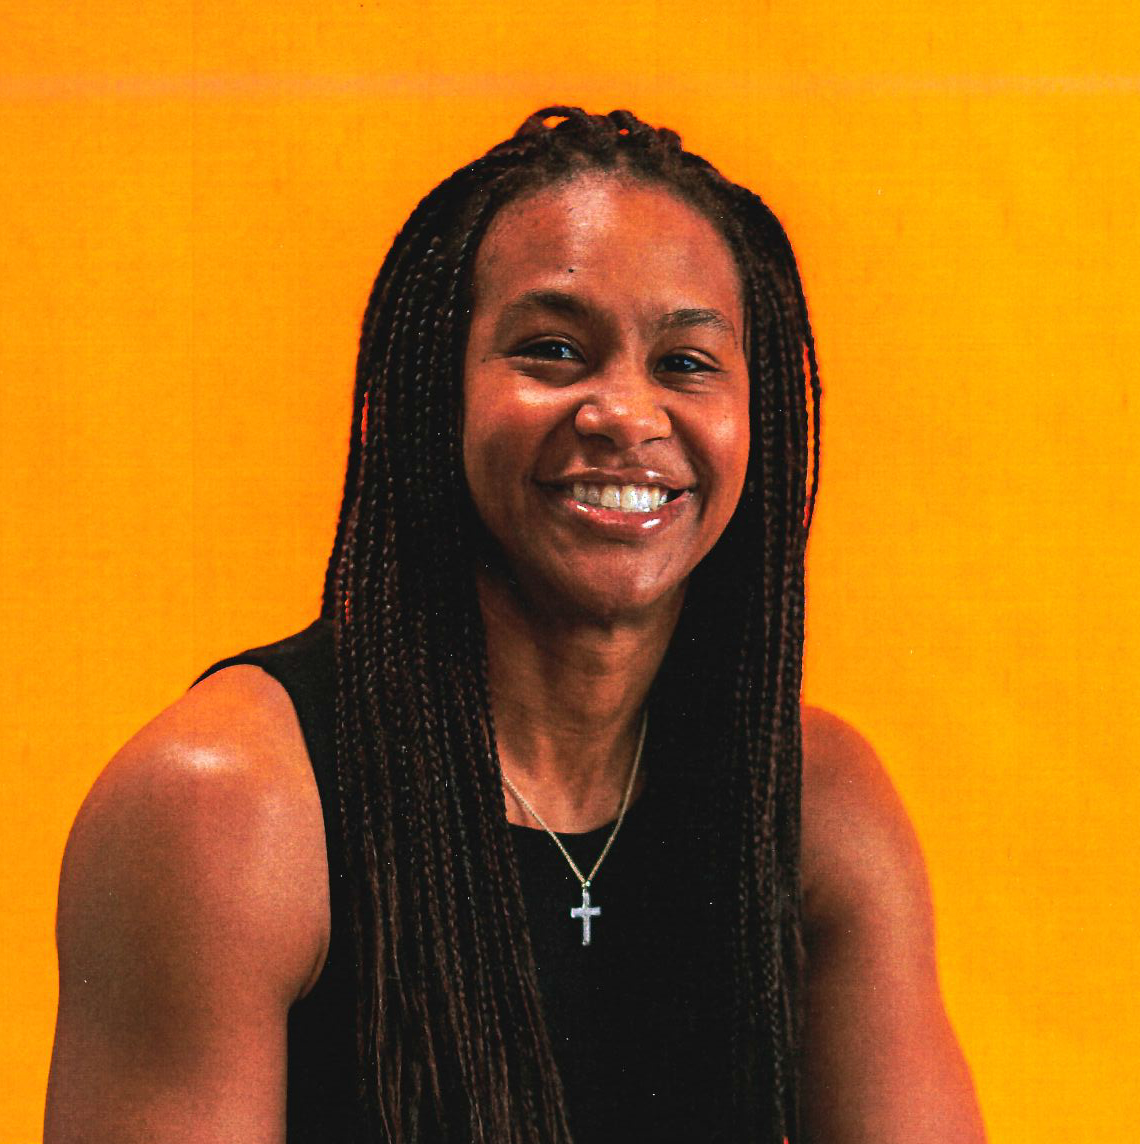 🏅 The #IHSA congratulates Tamika Catchings on being named to the 2023 NFHS High School Hall of Fame Class! 🏀🏆 A @uiltexas nominee, Tamika won an @IHSAState title at Stevenson HS & was named Ms. Basketball in IL prior to moving to Texas. 🔗More Info➡️ihsa.org/News-Media/Ann…